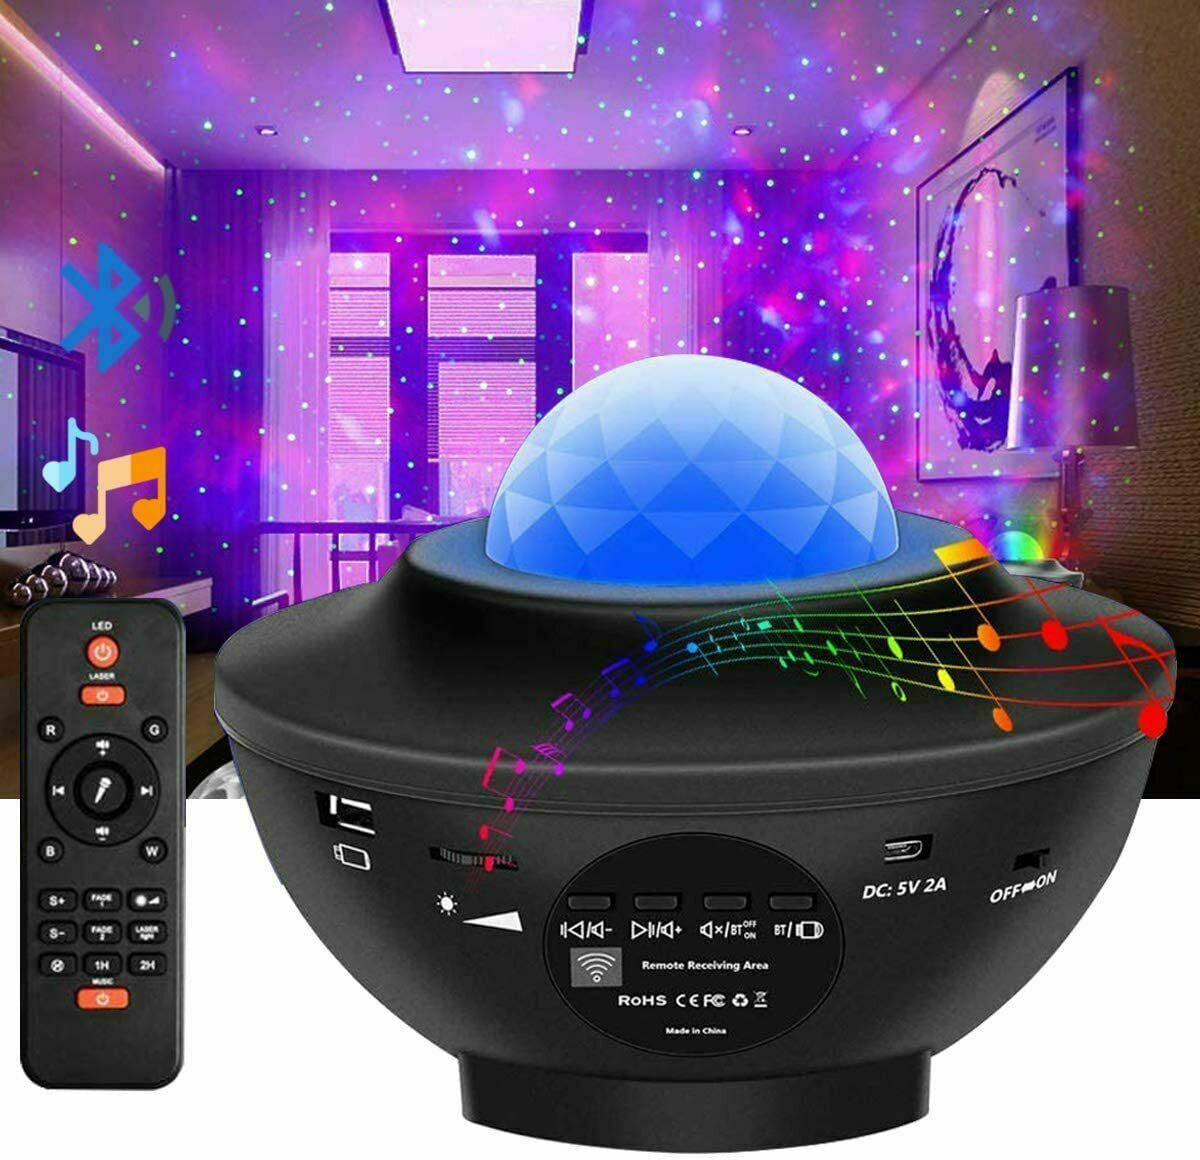 LED Starry Projector Night Light Sky Galaxy Ocean Star Lamp Remote Control D2M5 